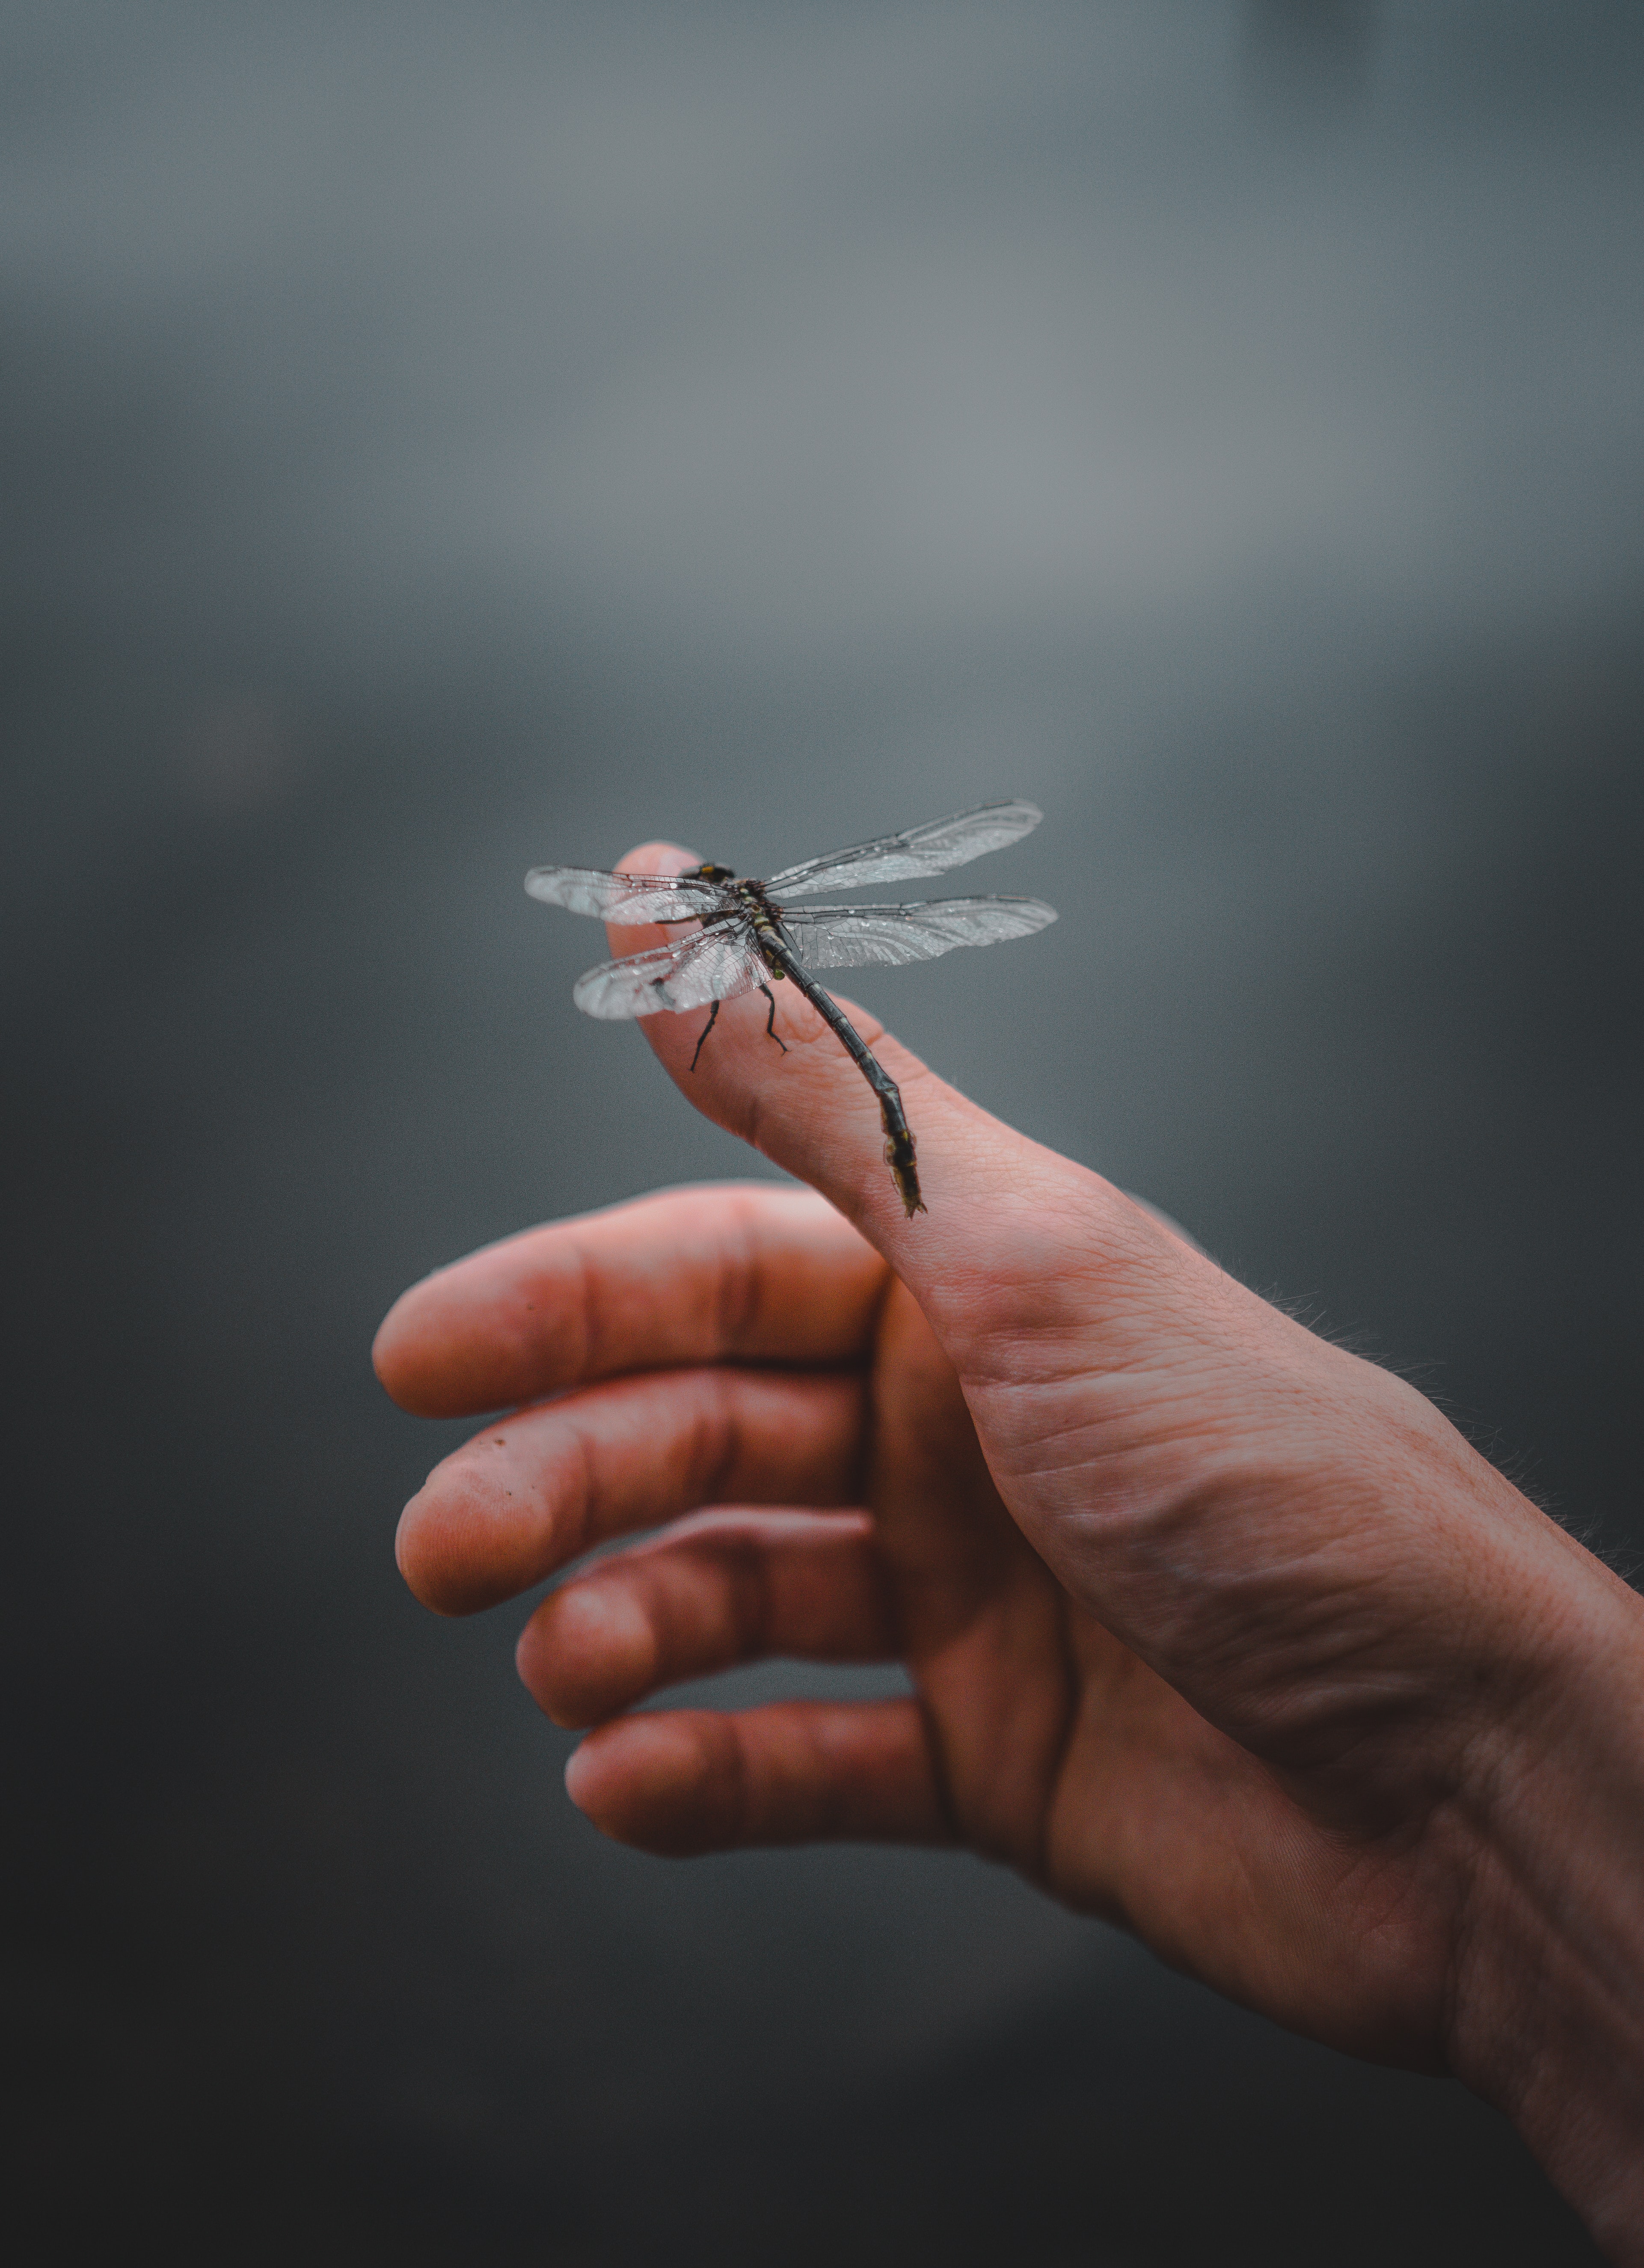 HD wallpaper dragonfly, hand, miscellanea, miscellaneous, insect, fingers